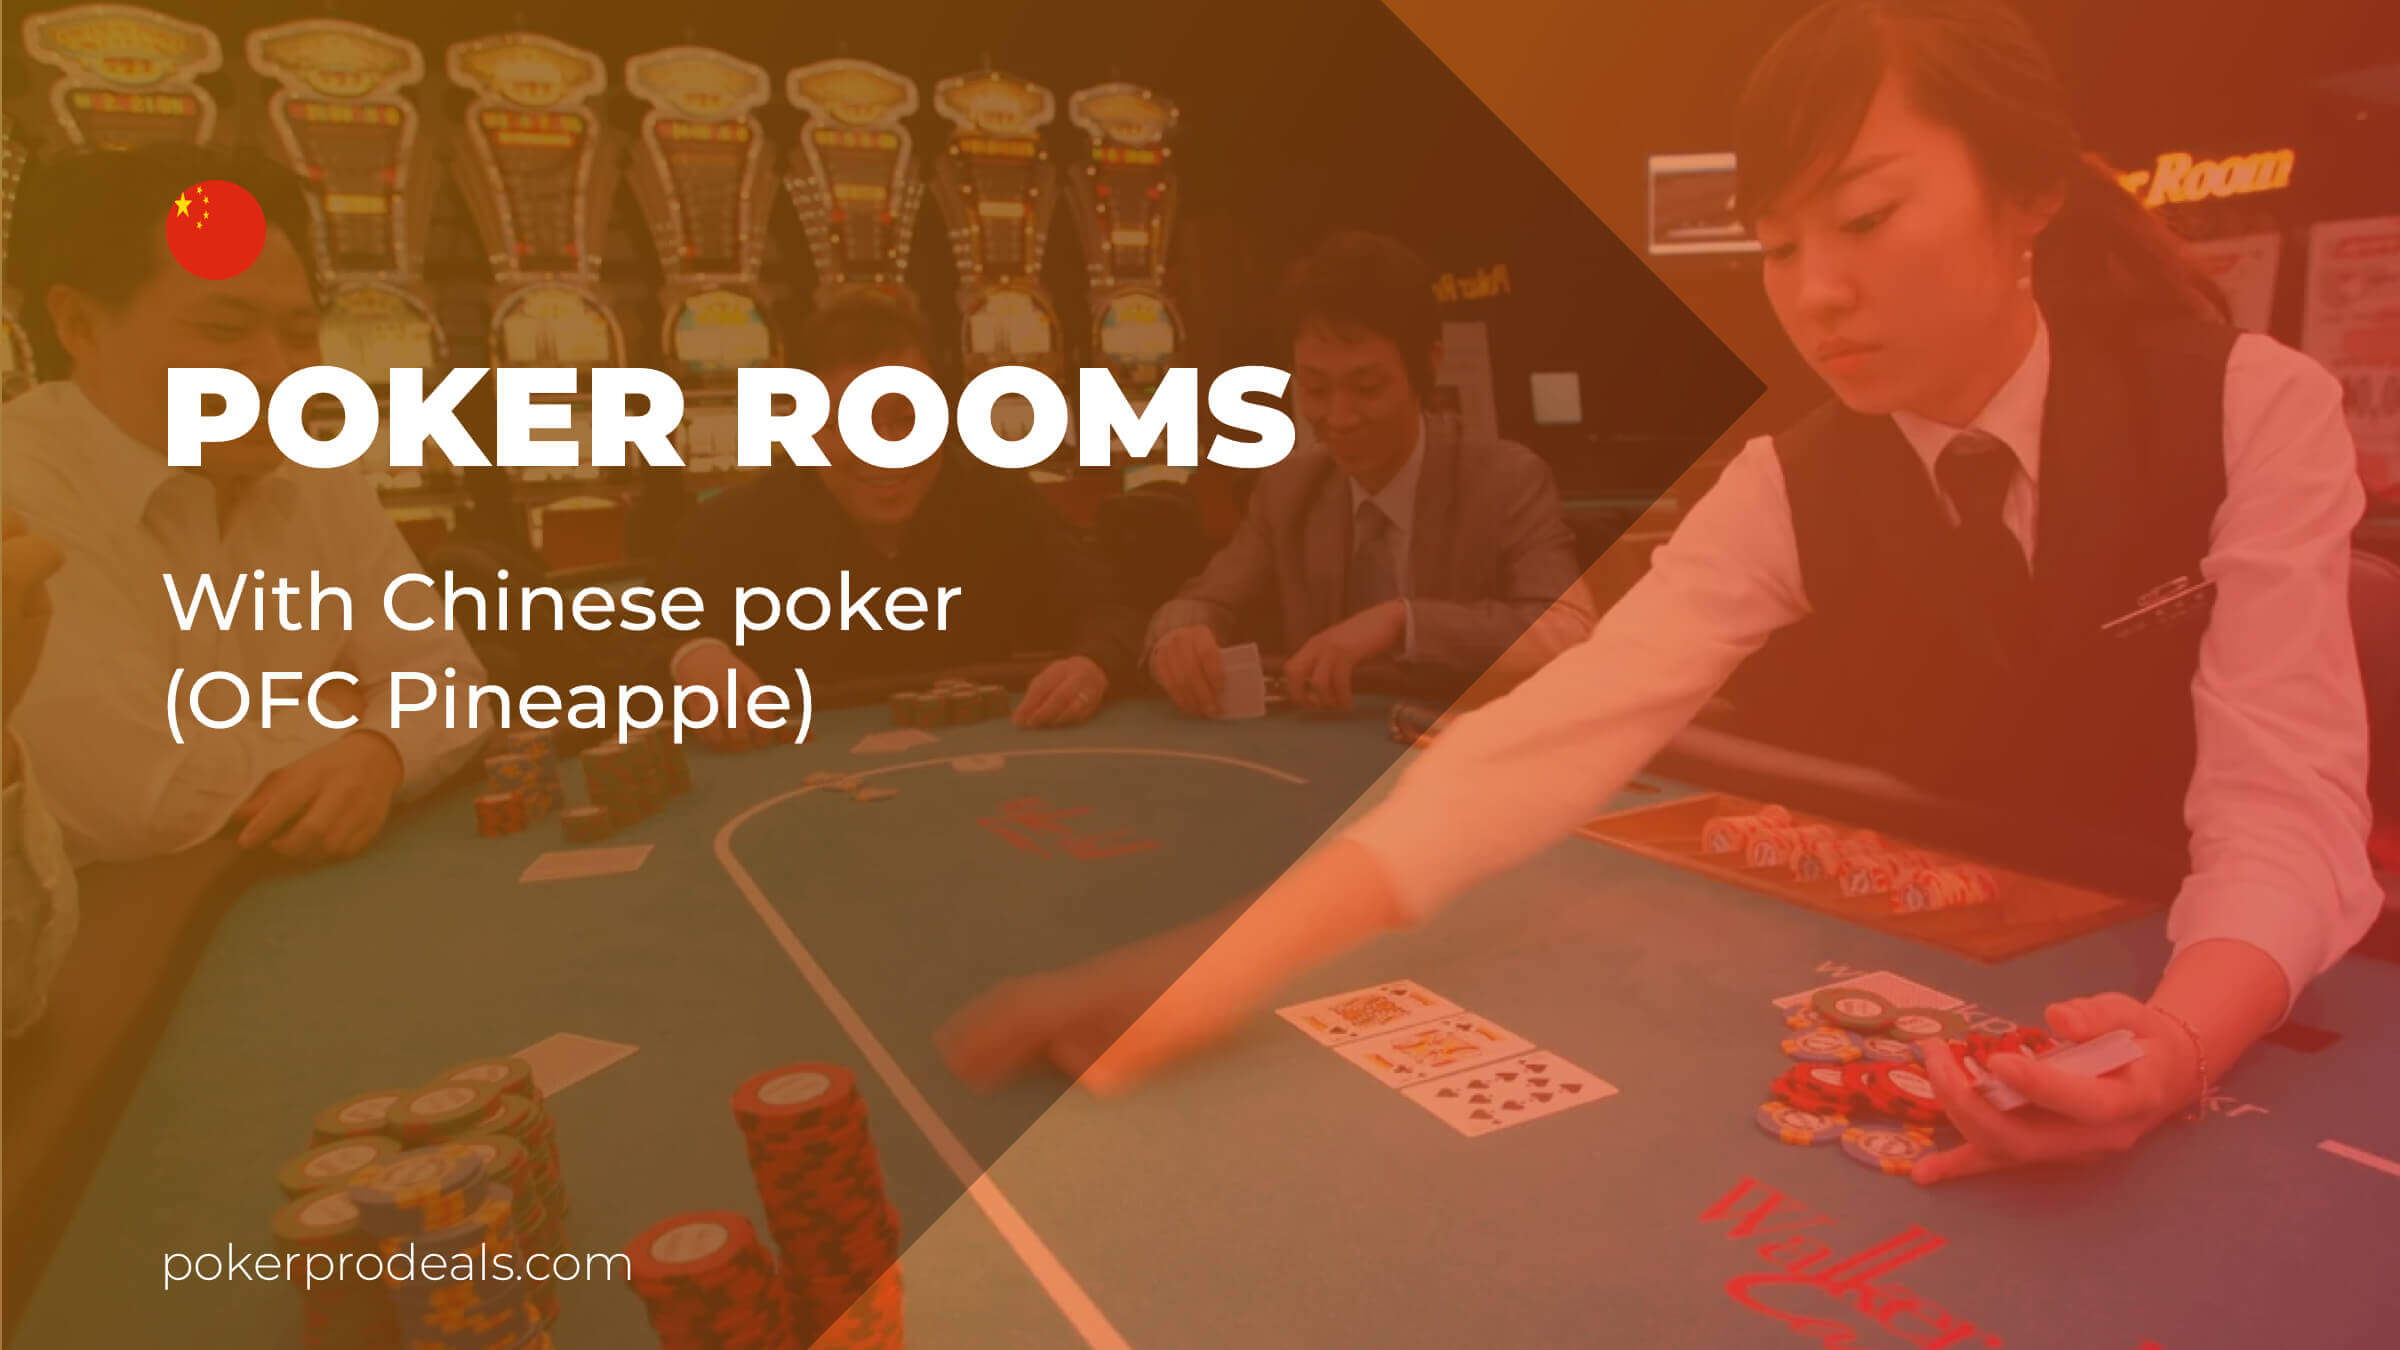 Poker rooms with Chinese poker (OFC Pineapple)